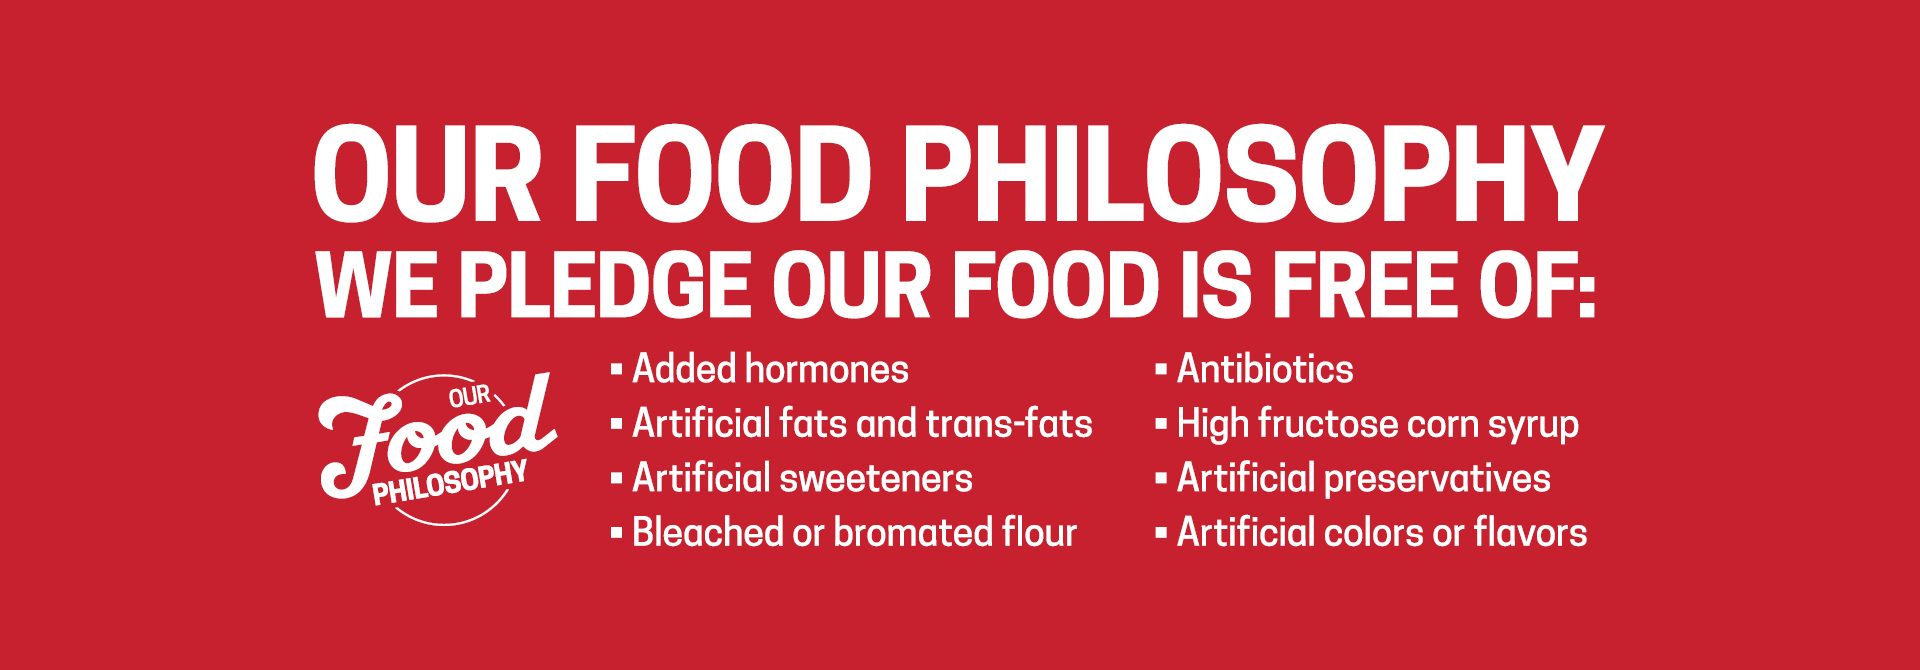 Our Food Philosophy